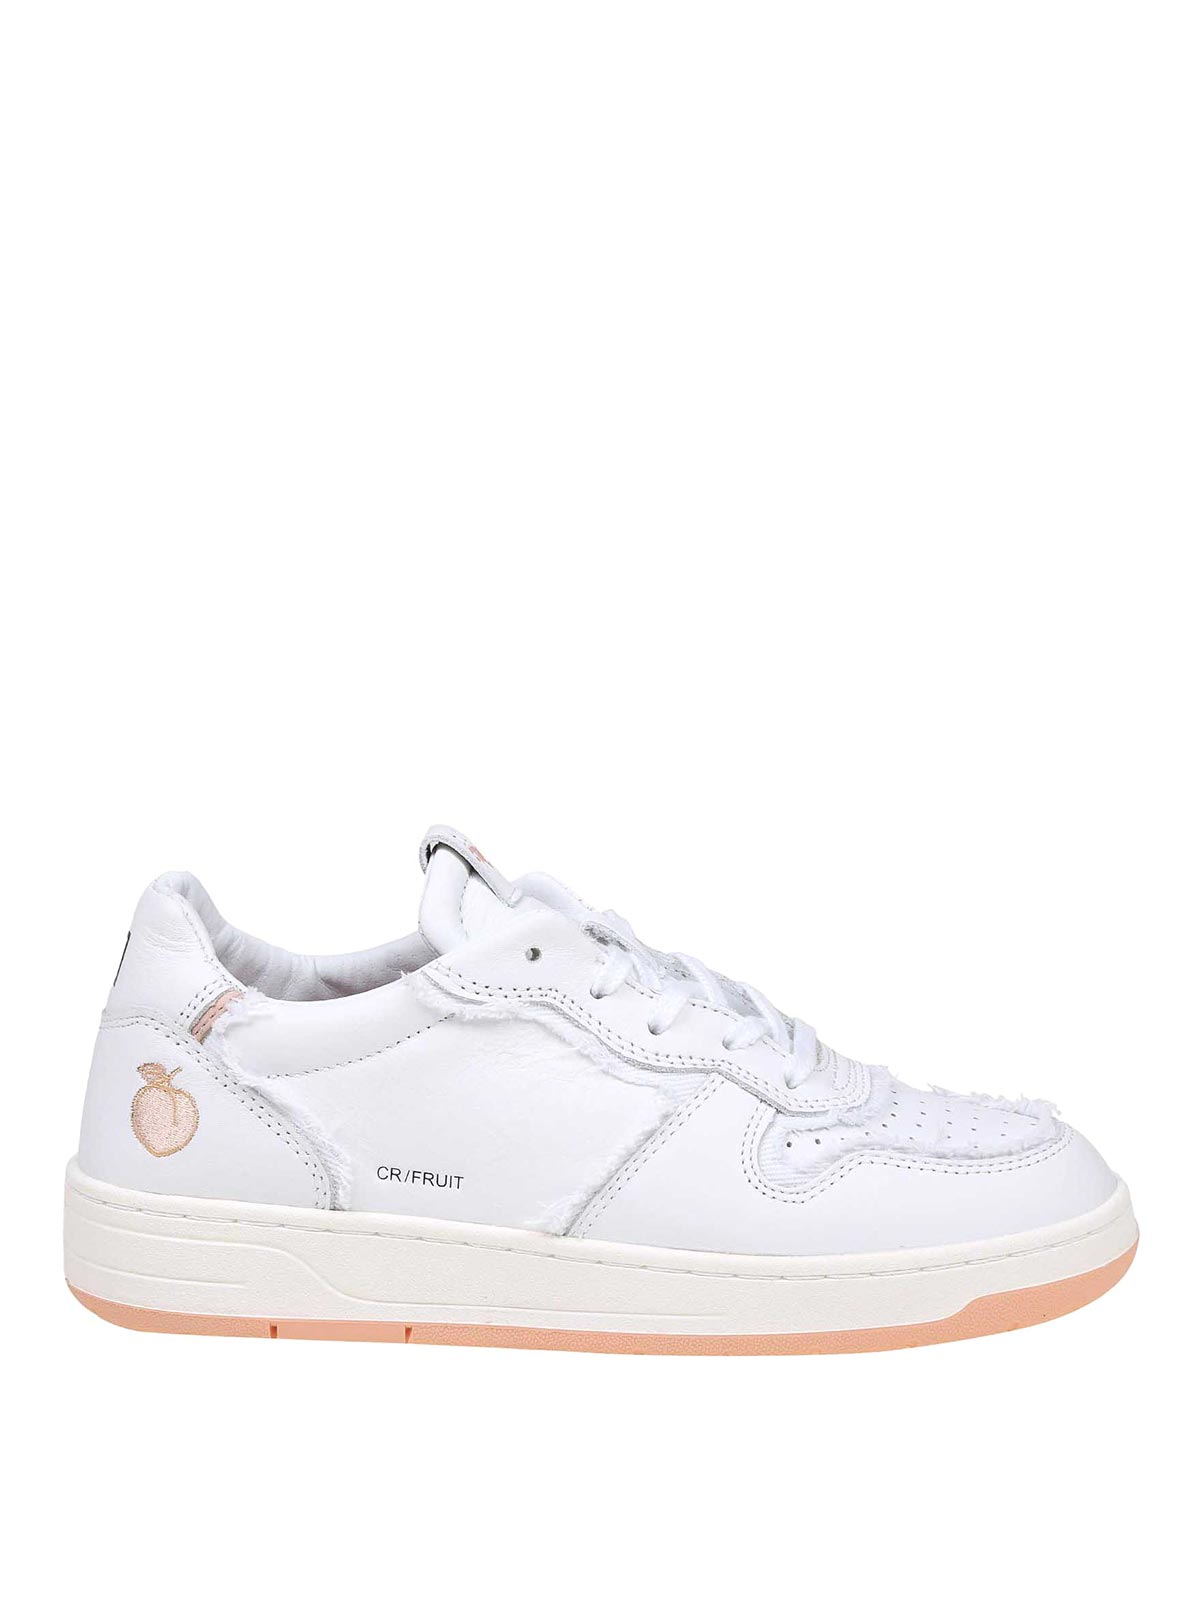 Shop Date Leather Sneakers In Rosado